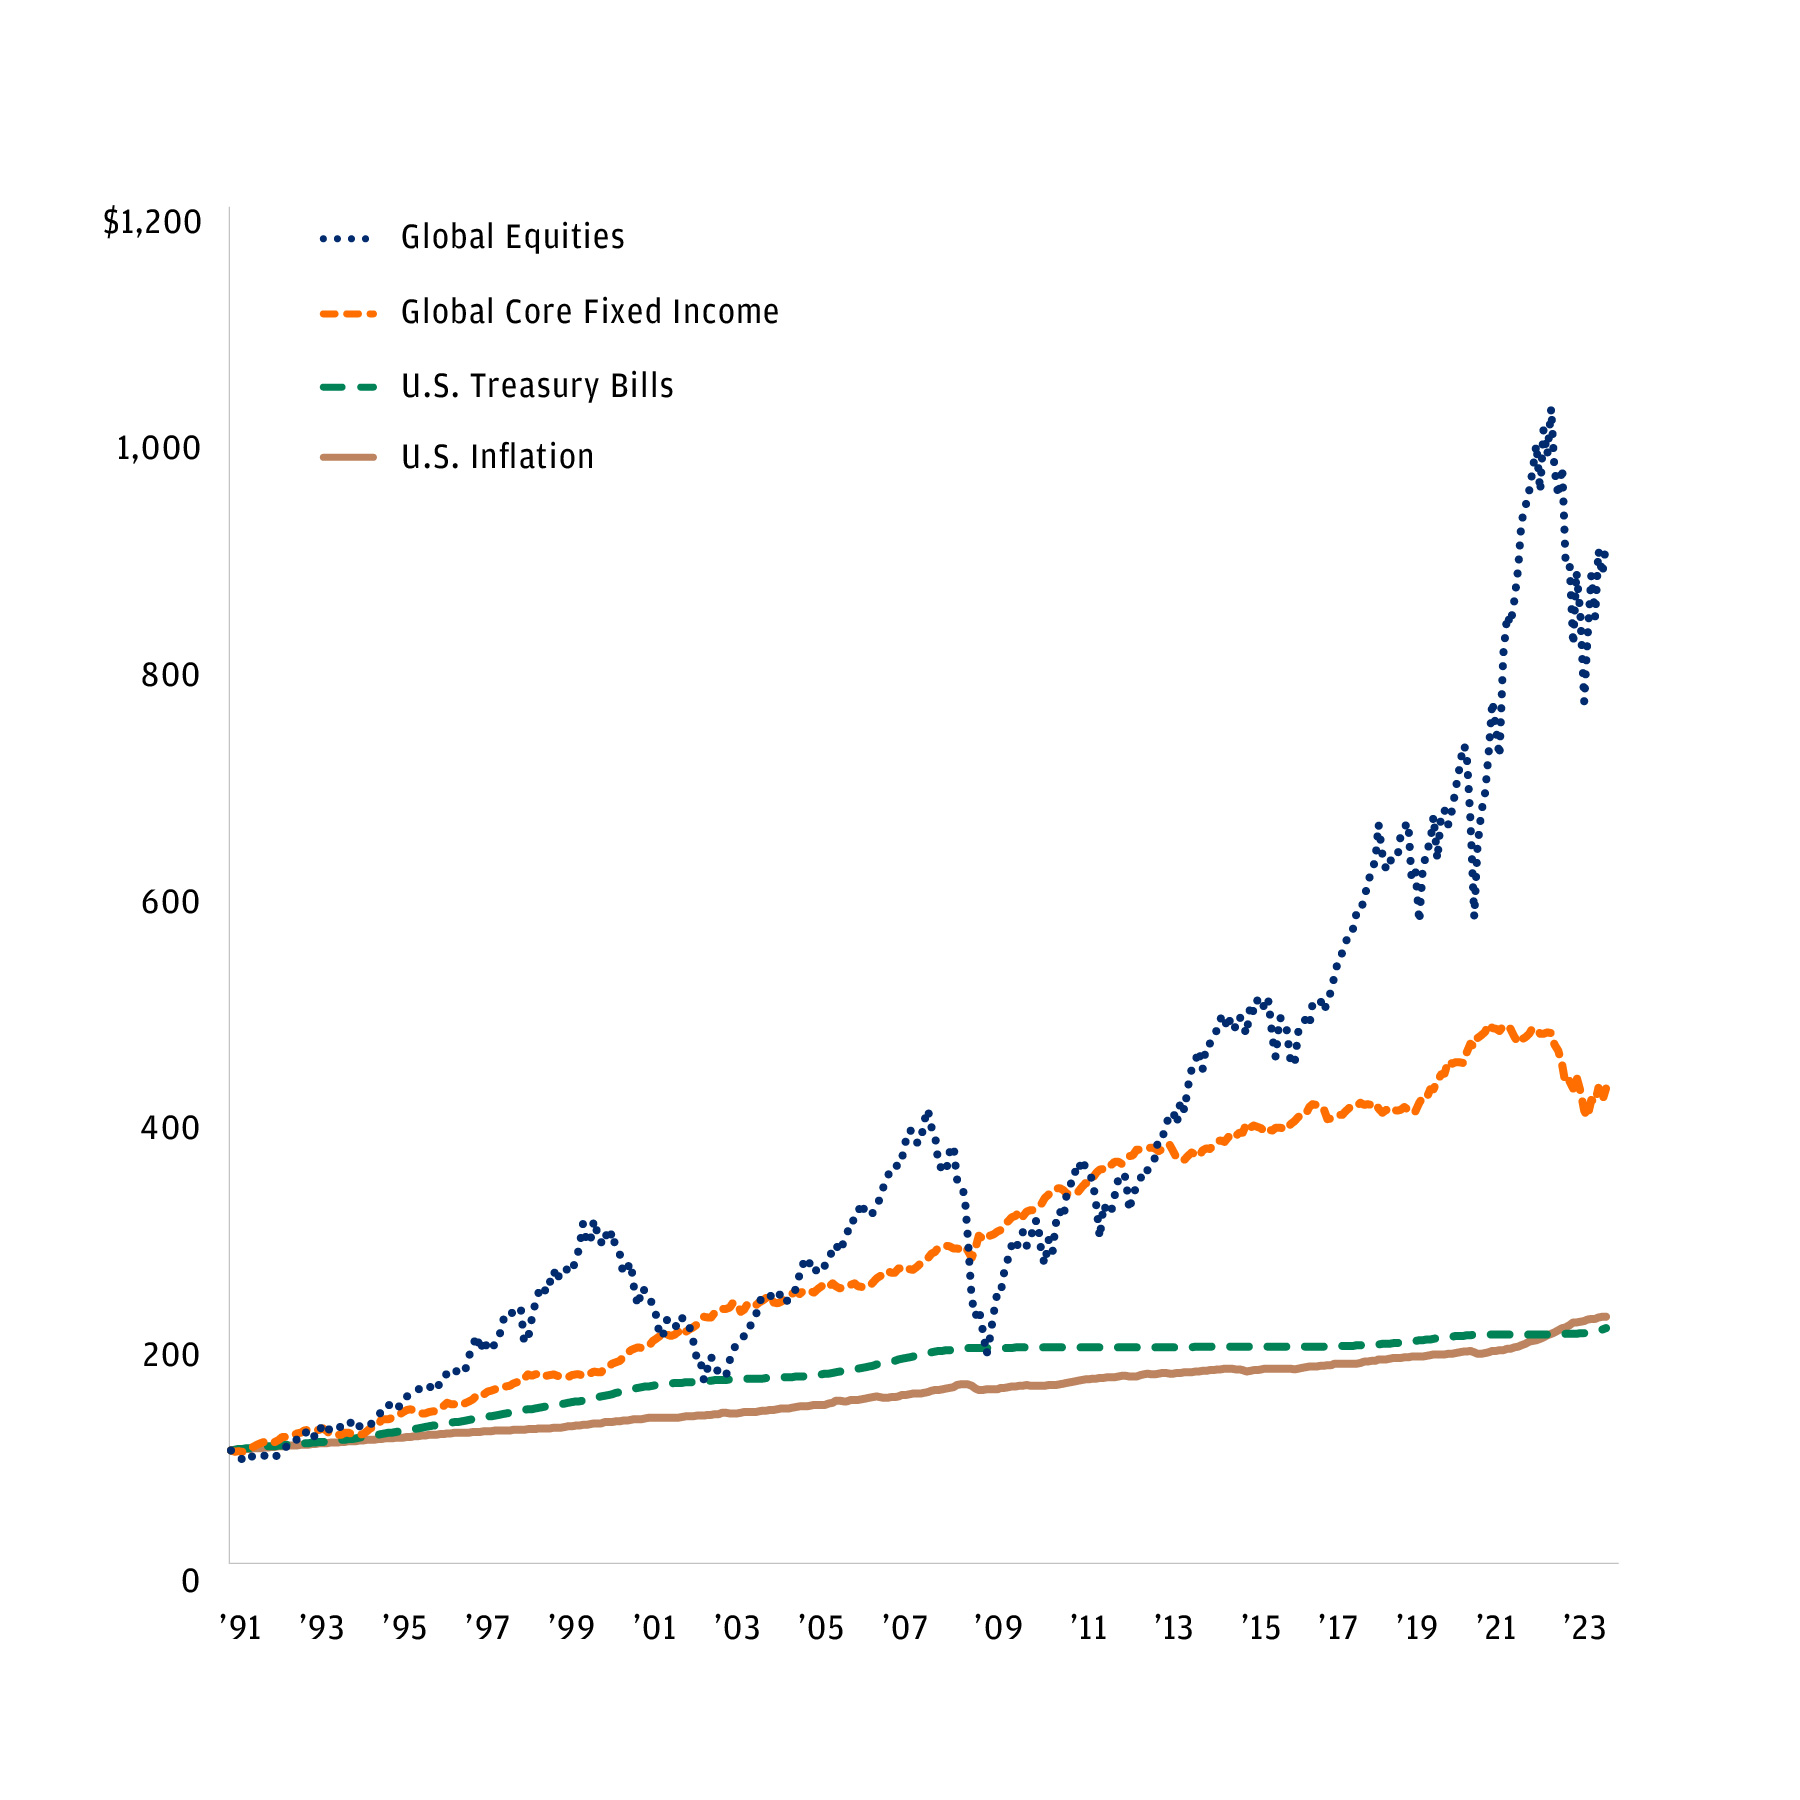 This chart shows the growth of $100 in global core fixed income, global equities, U.S. treasury bills, and U.S. inflation from 1991, and includes LTCMA projections past 2031. Equity and fixed income outperformed cash and inflation. 